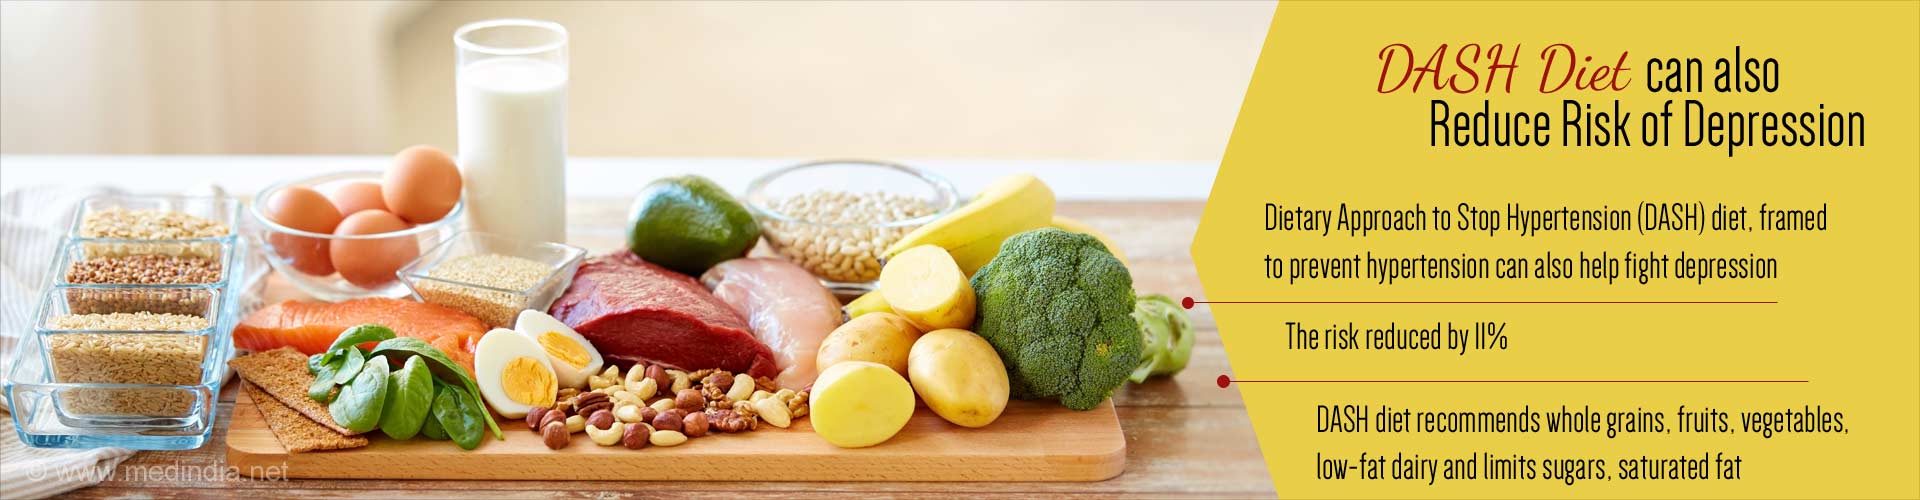 DASH diet can also reduce risk of depression
- dietary approach to stop hypertension (DASH) diet, framed to prevent hypertension can also help fight depression
- the risk is reduced by 11%
- DASH diet recommends whole grains, fruits, vegetables, low-fat dairy and limits sugars, saturated fat